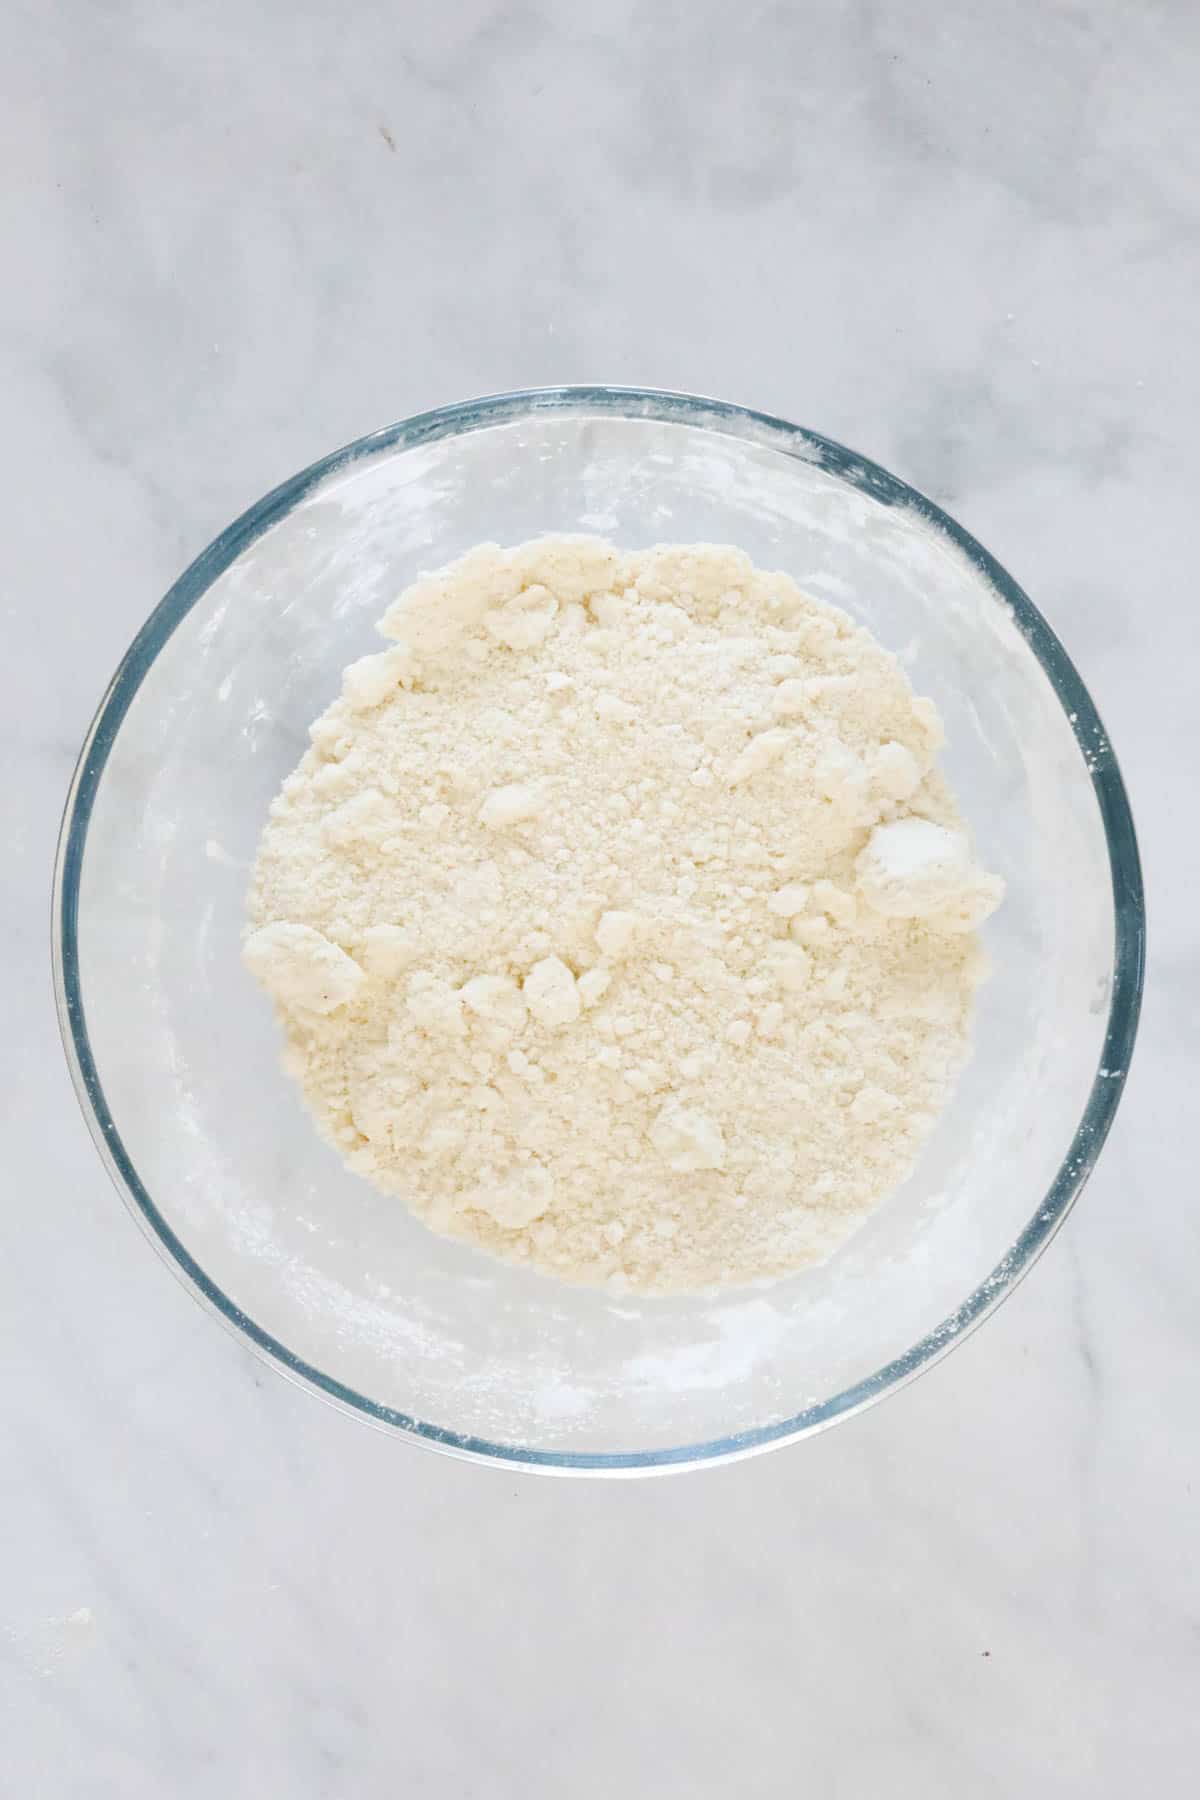 Flour and butter mixture resembling breadcrumbs in a bowl.